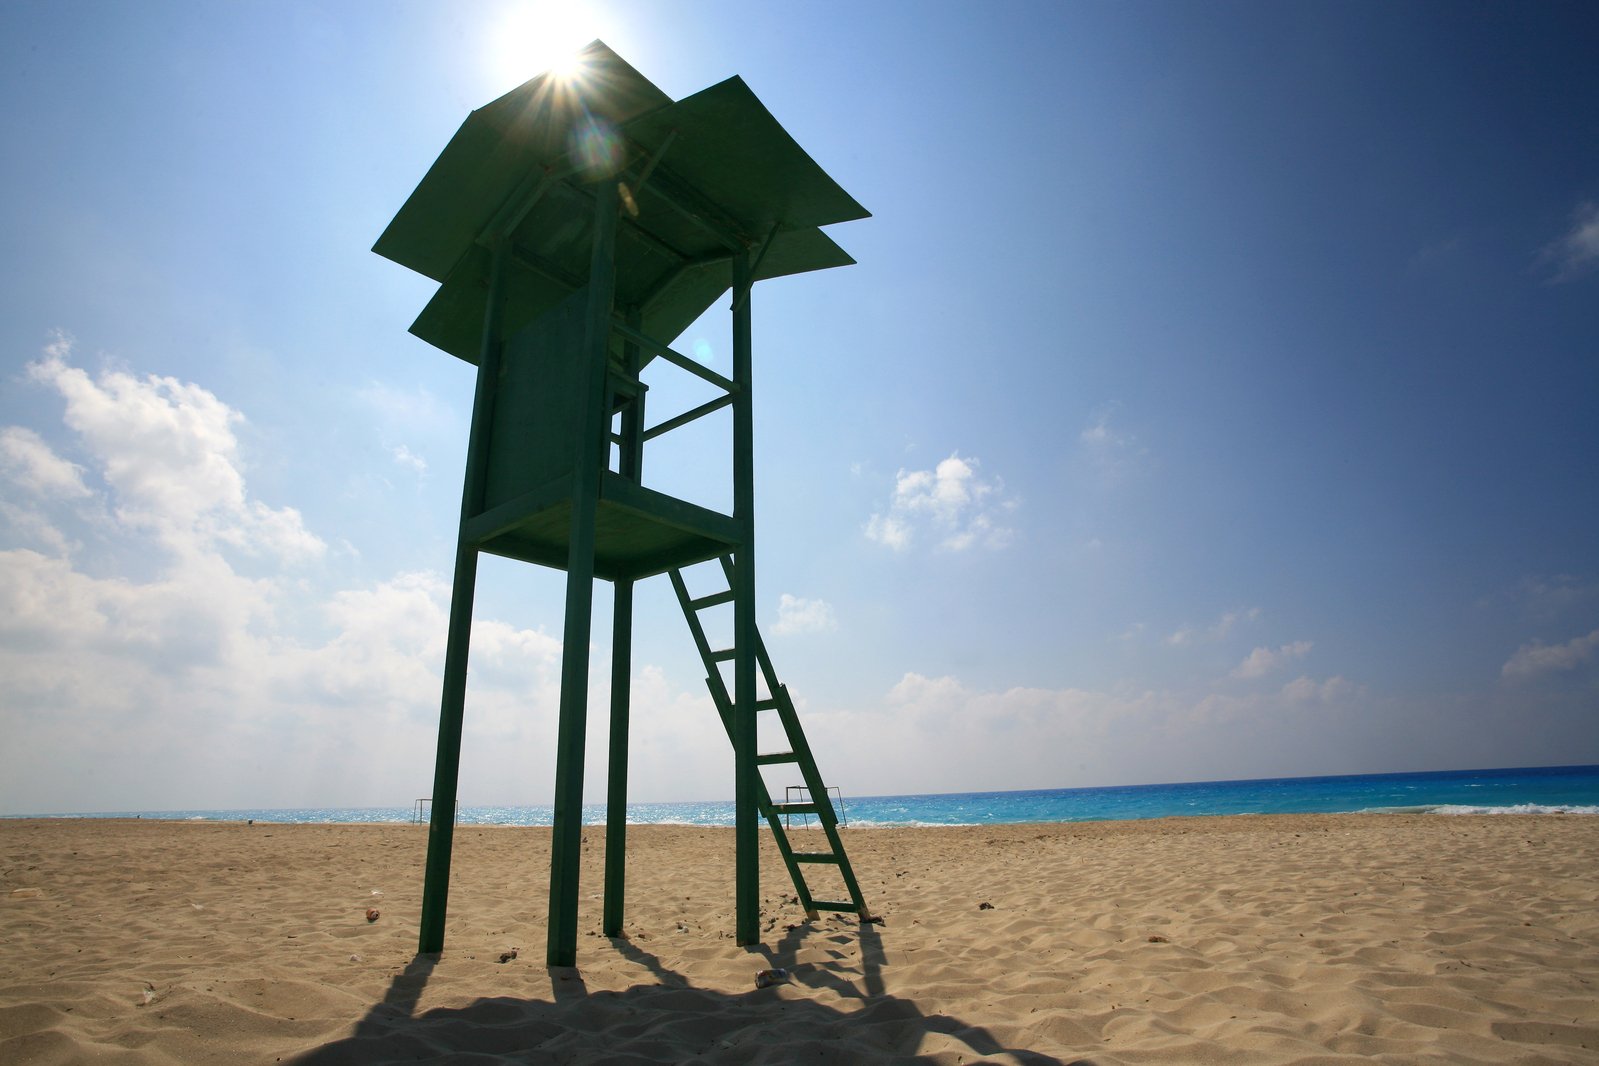 a lifeguard tower that has a ladder to access it